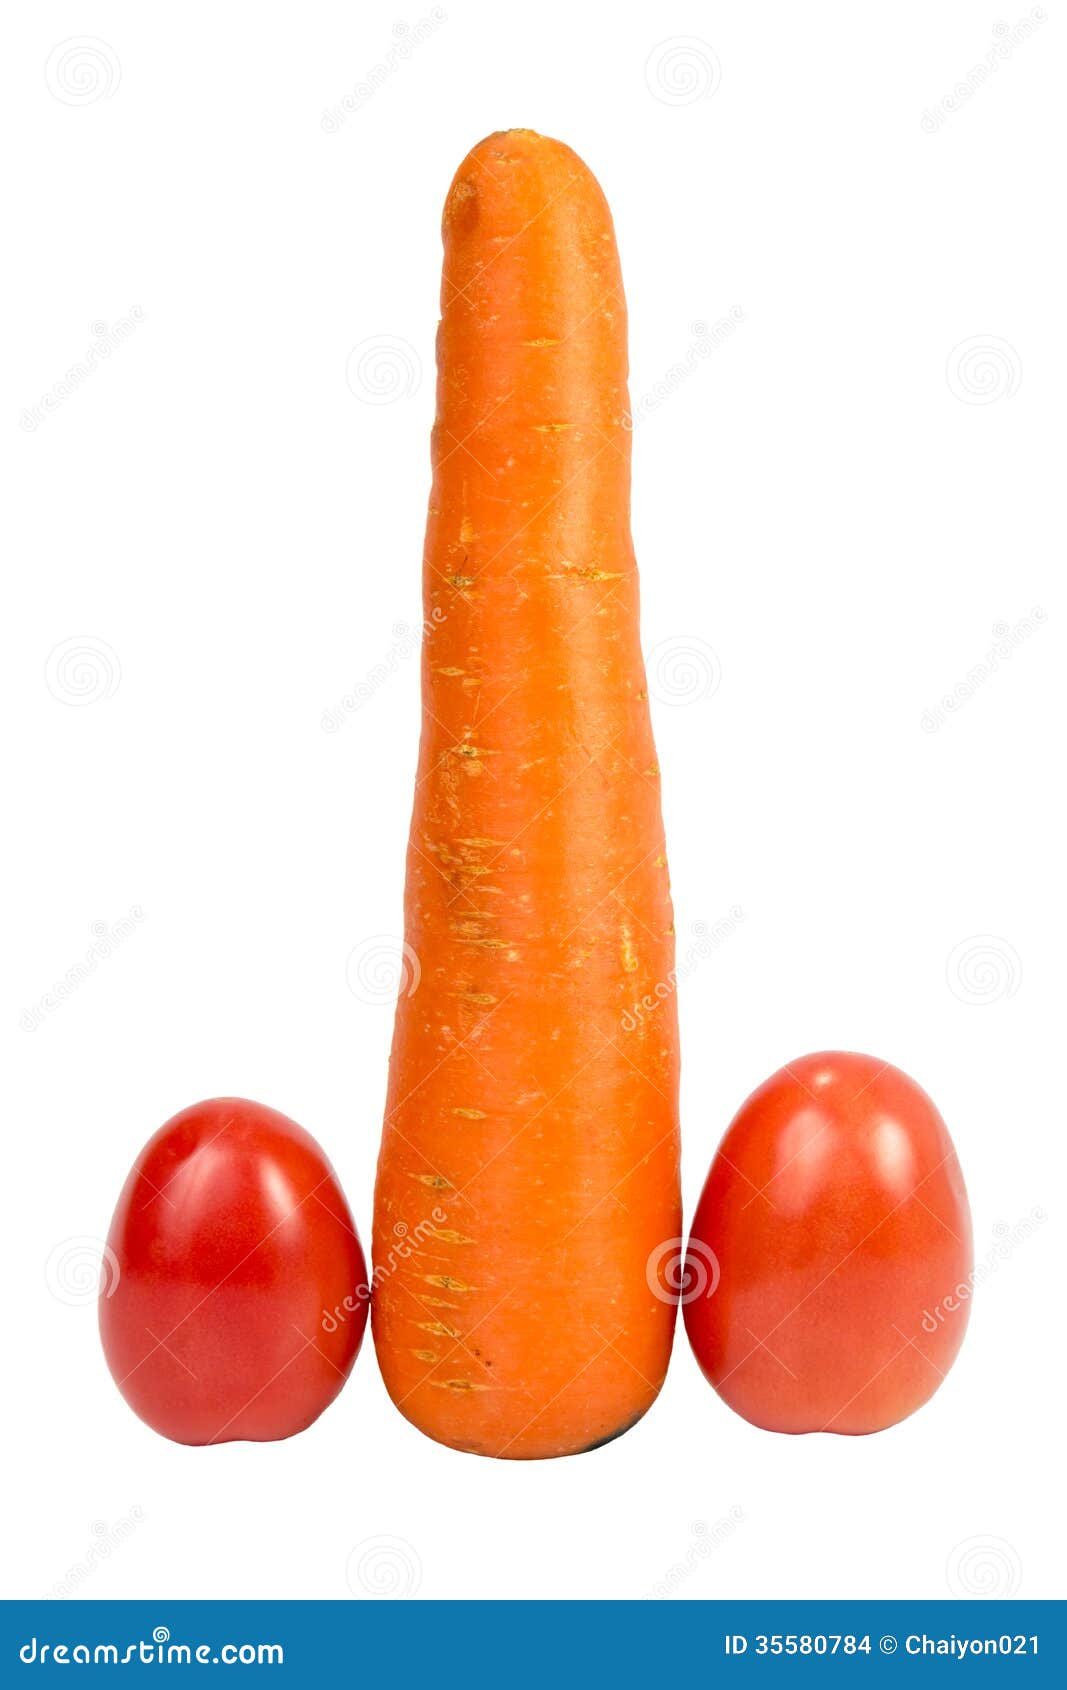 ic phallic concept image of carrot and two tomatoes